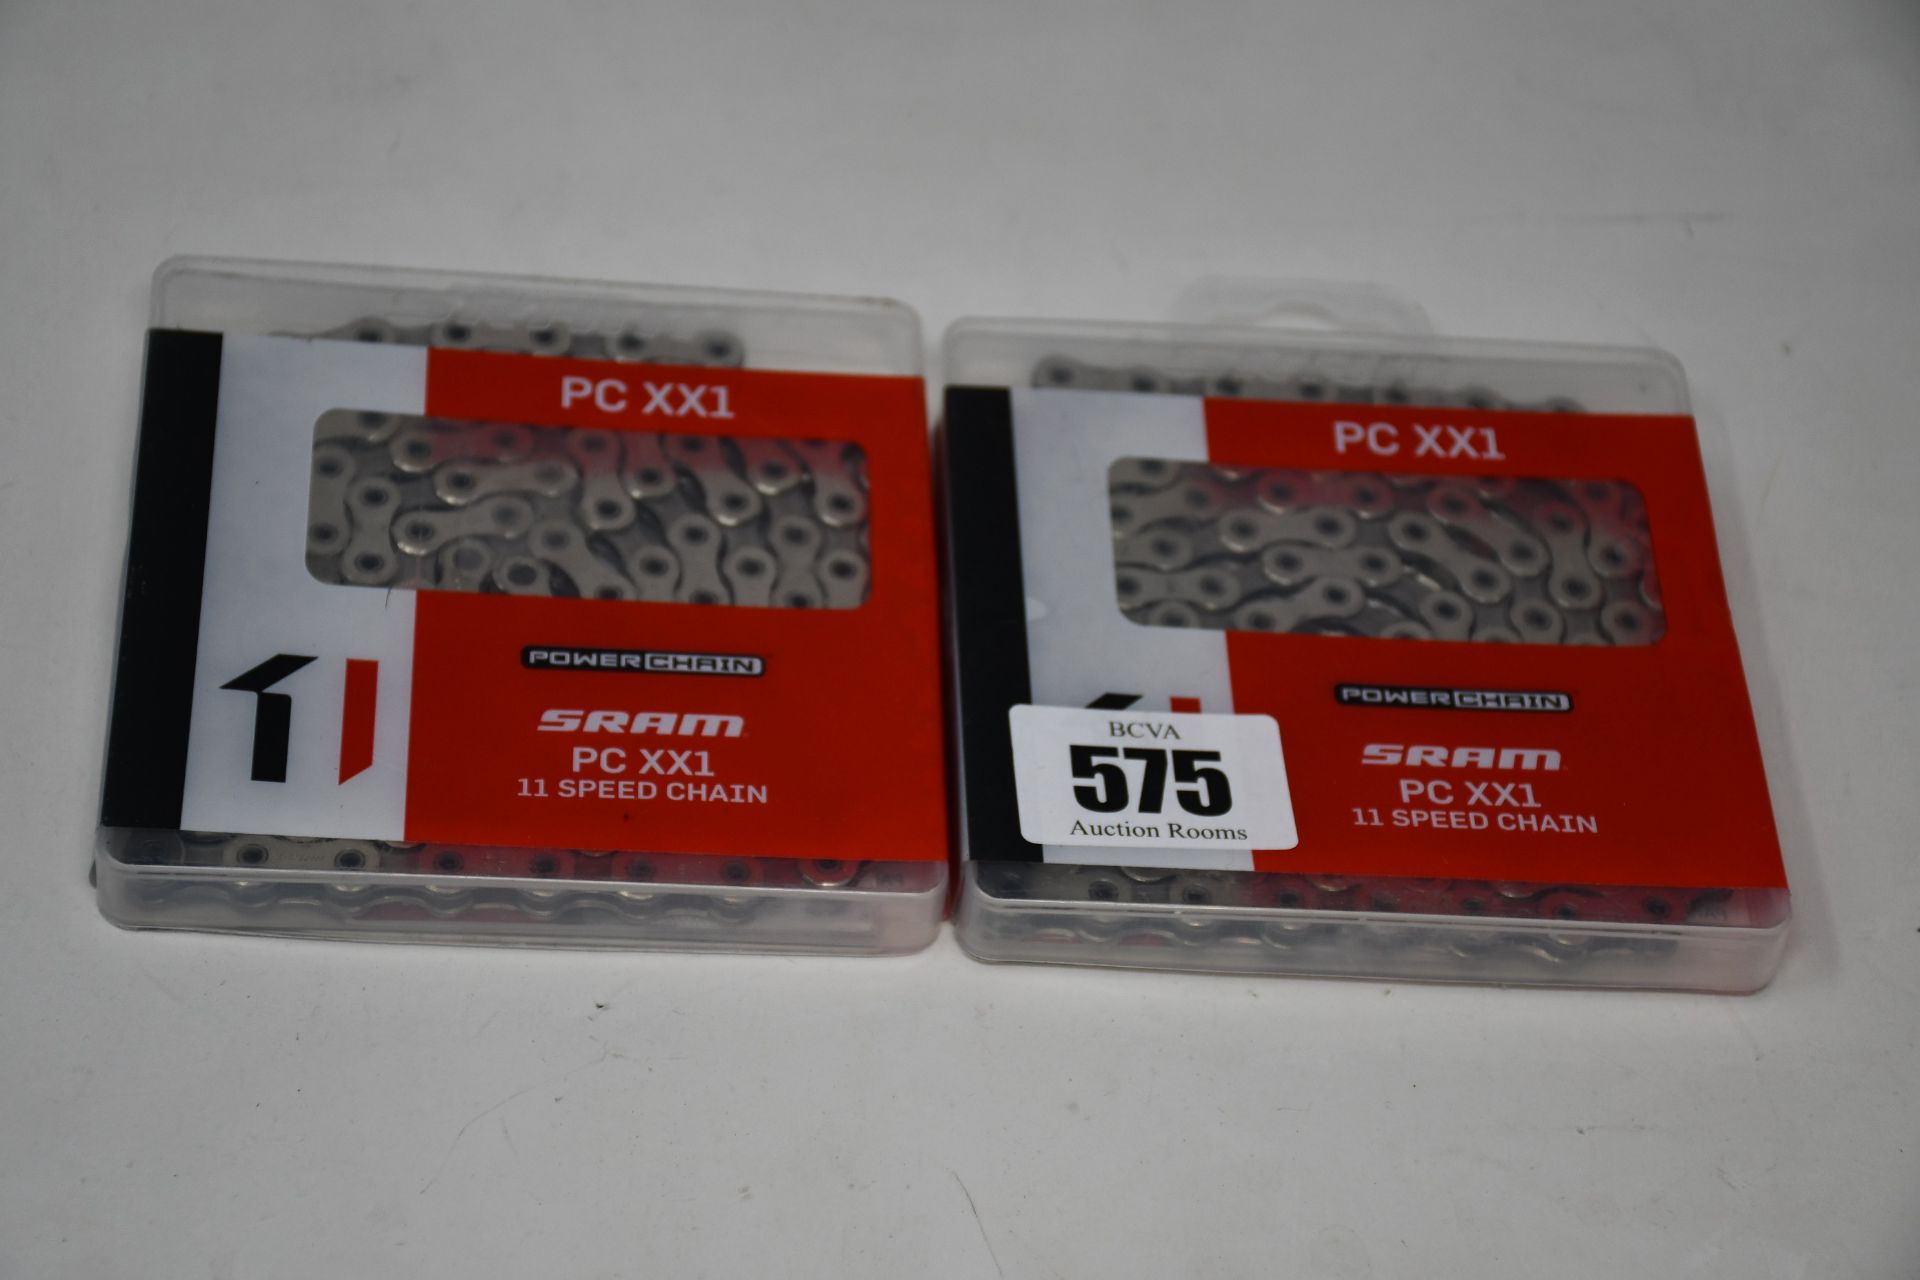 Six as new SRAM PC XX1 11 Speed Chains (HollowPin riveting, 118 links).